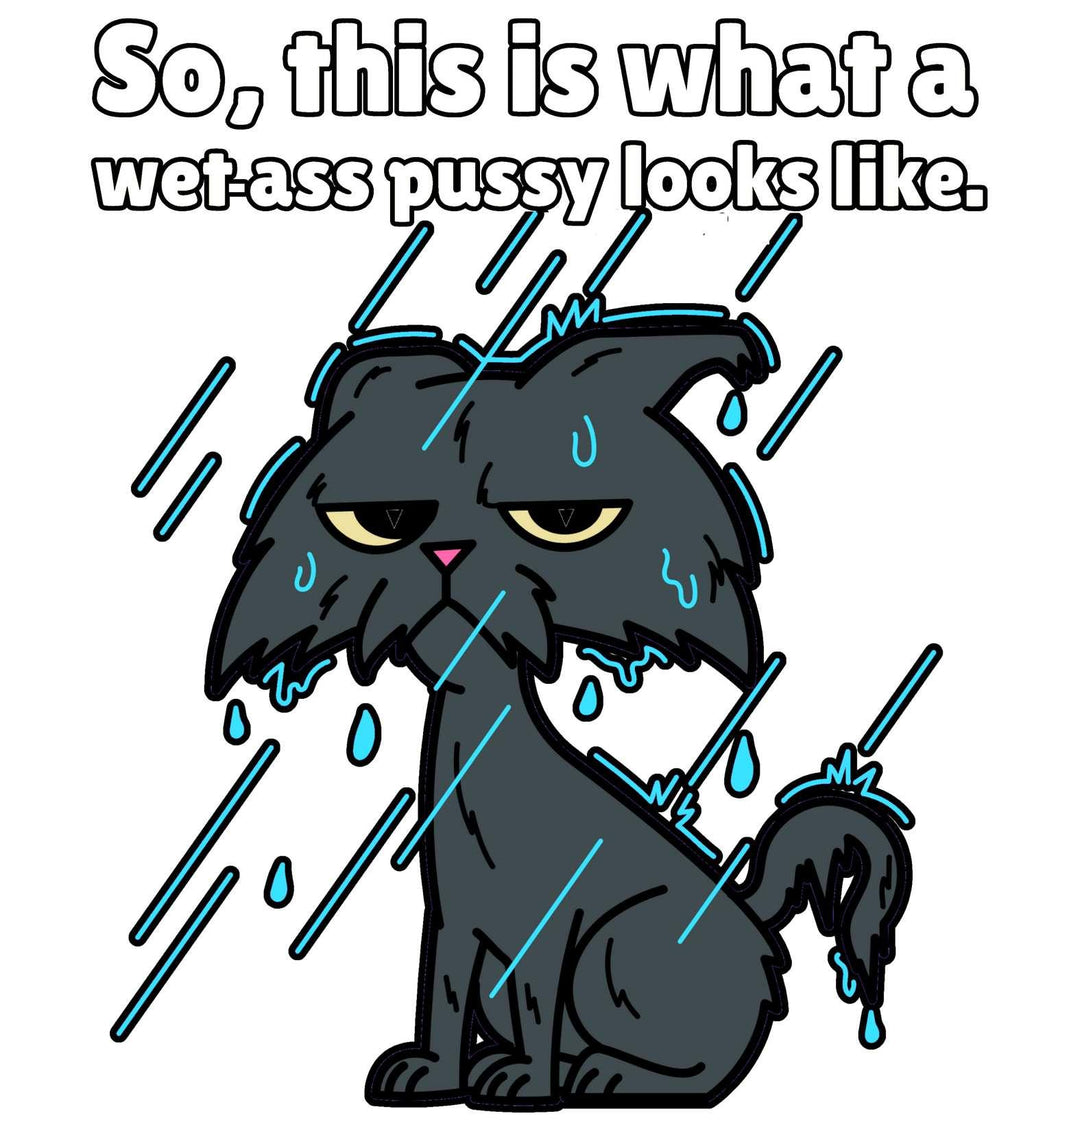 So, this is what a wet-ass pussy looks like. - Witty Twisters T-Shirts